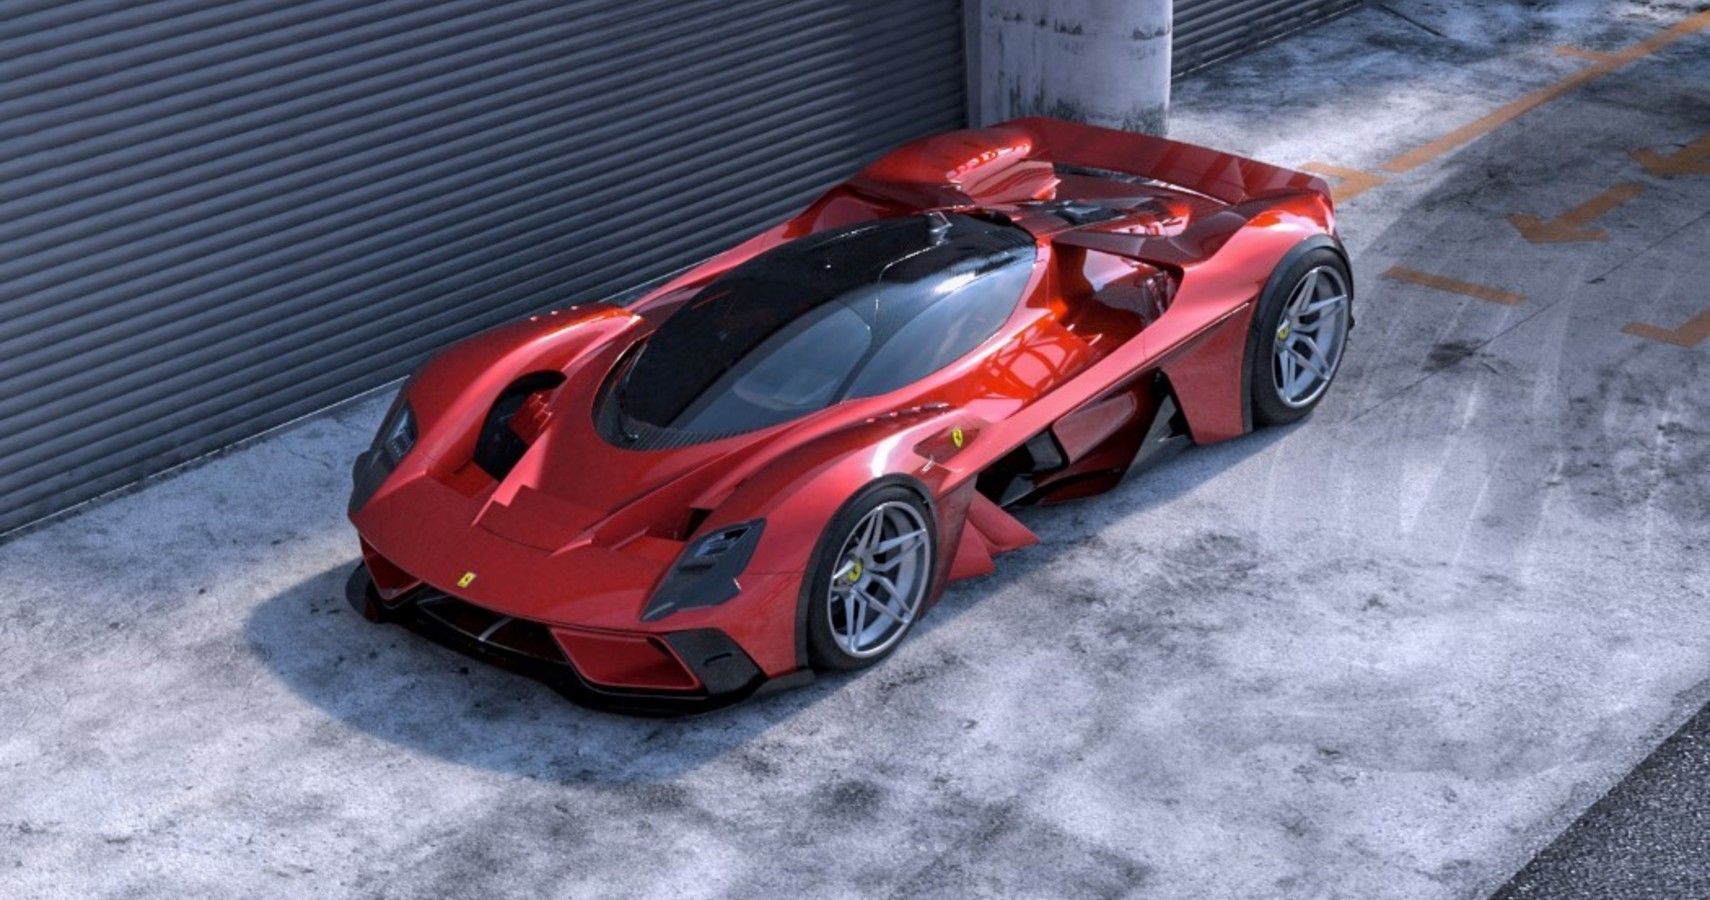 Check Out These Wild New Ferrari Hypercar Renders